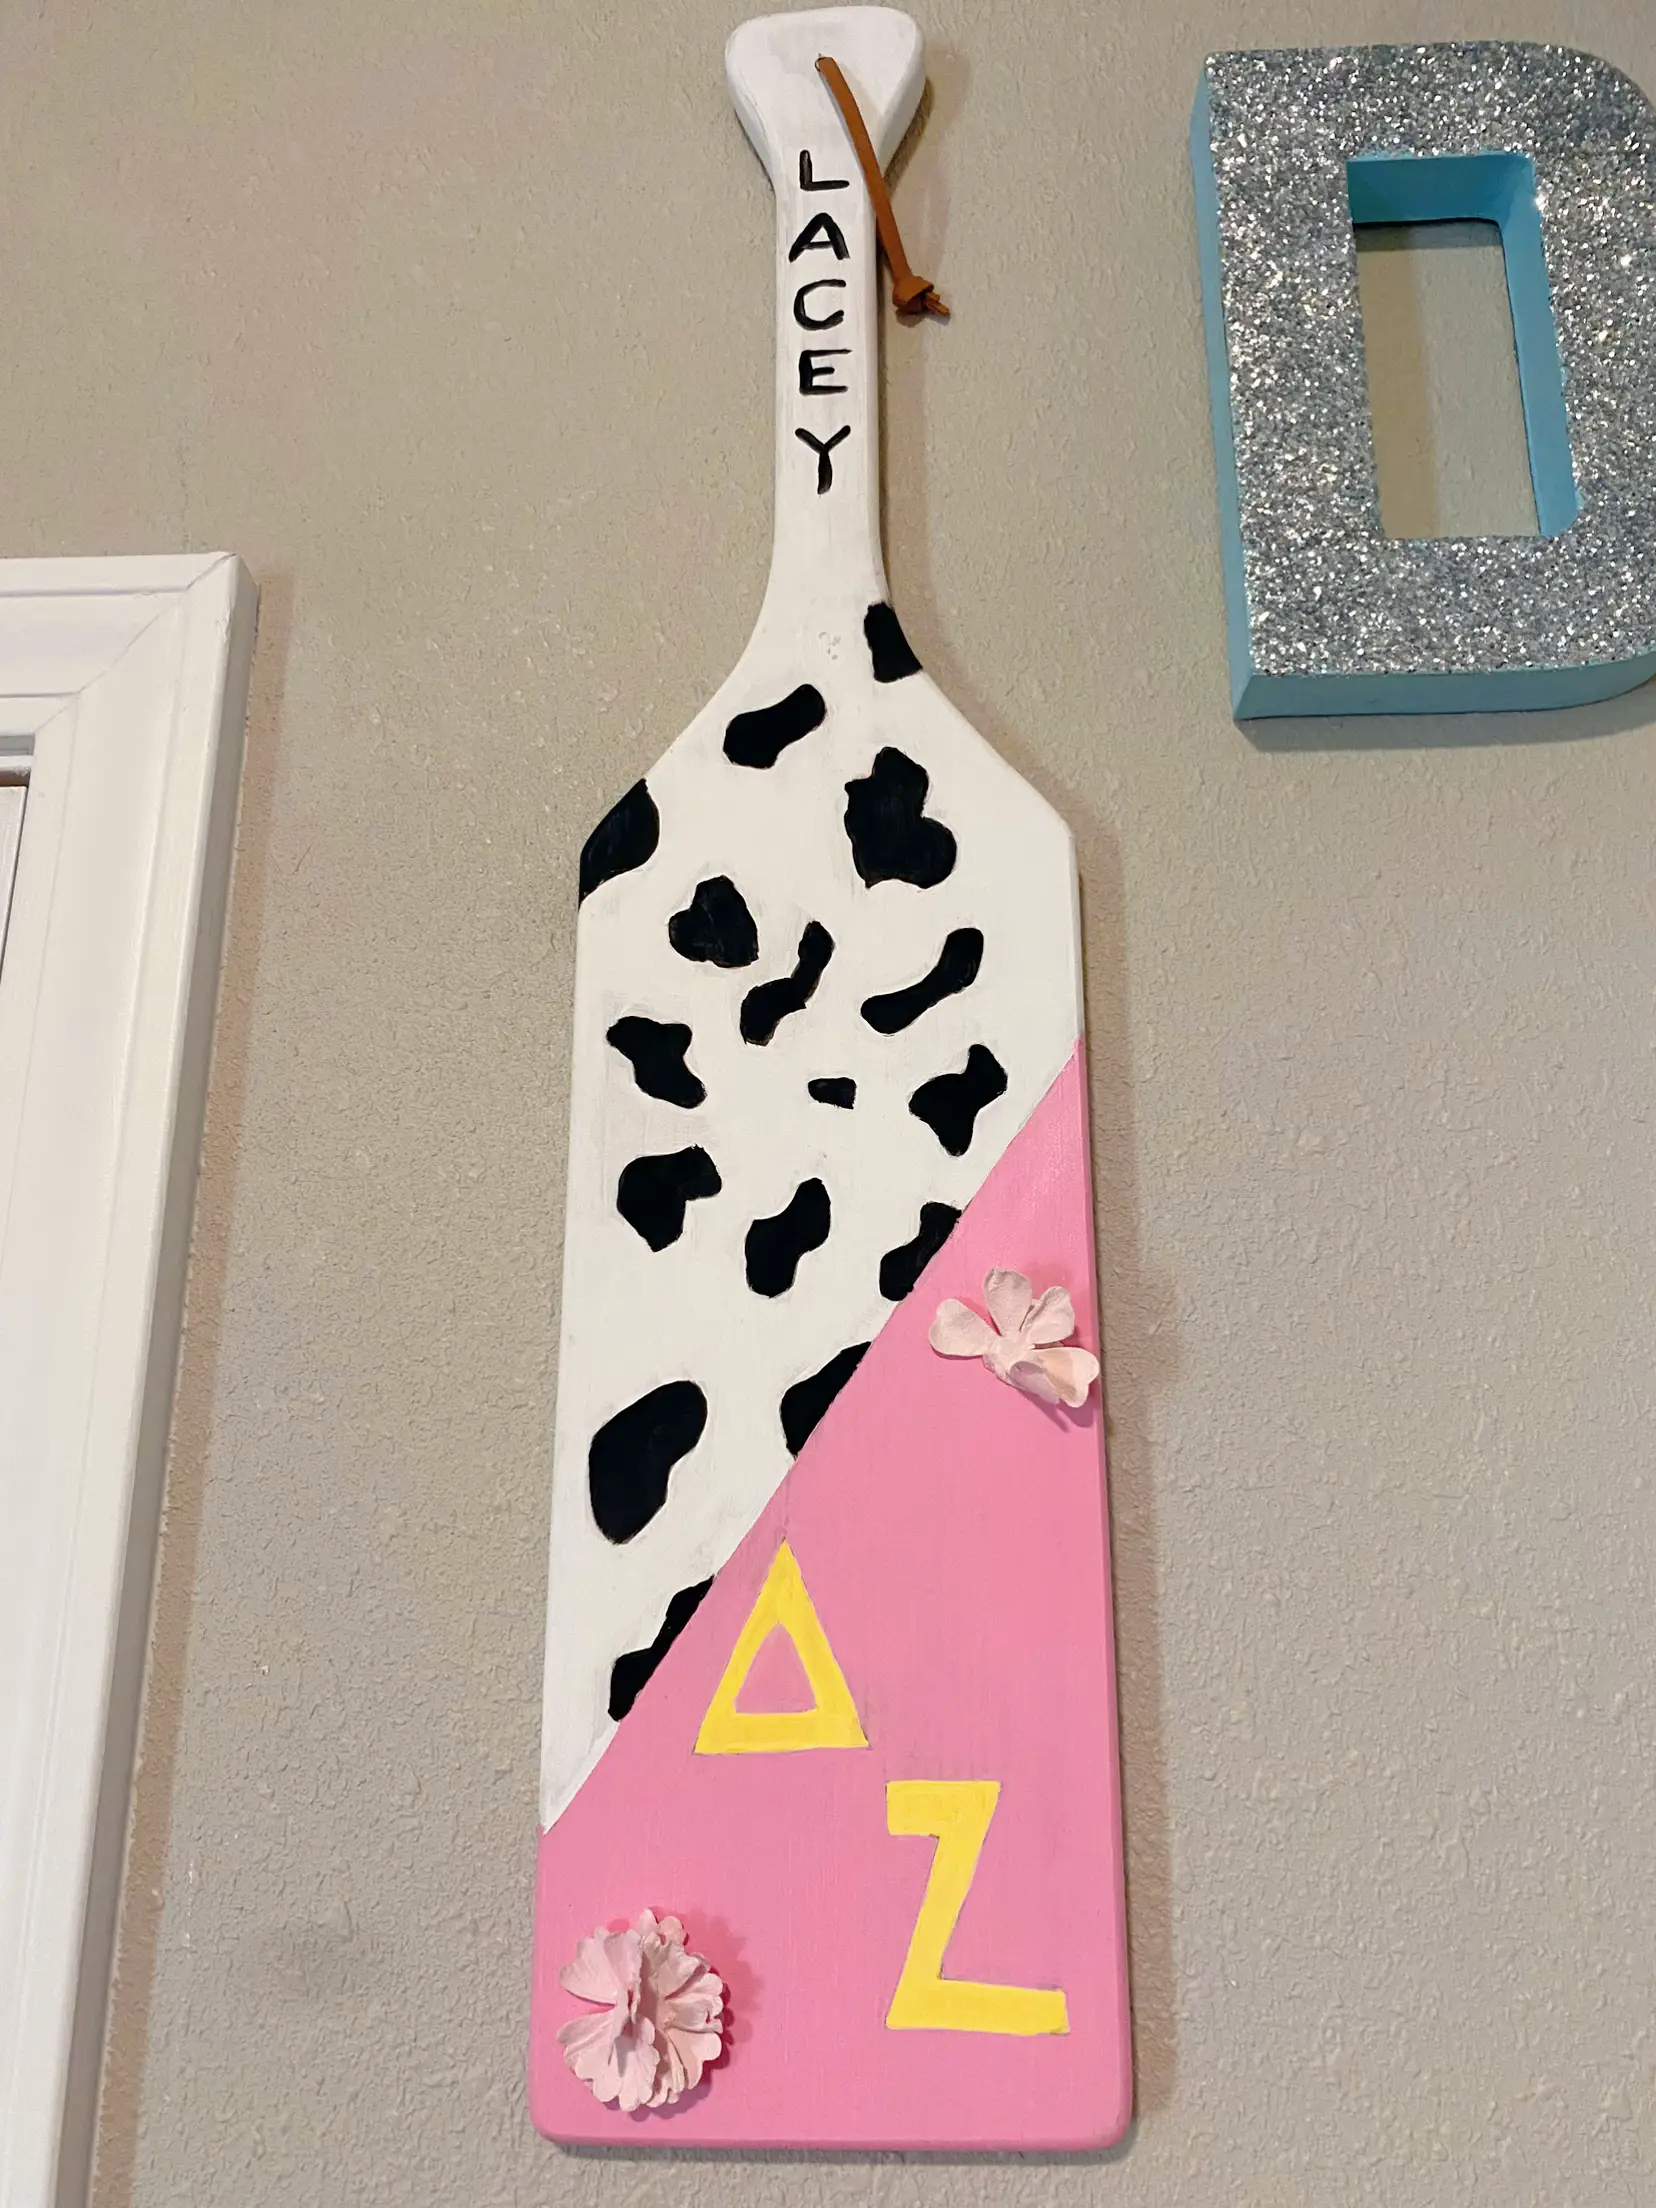 Sorority Paddle Ideas Gallery Posted